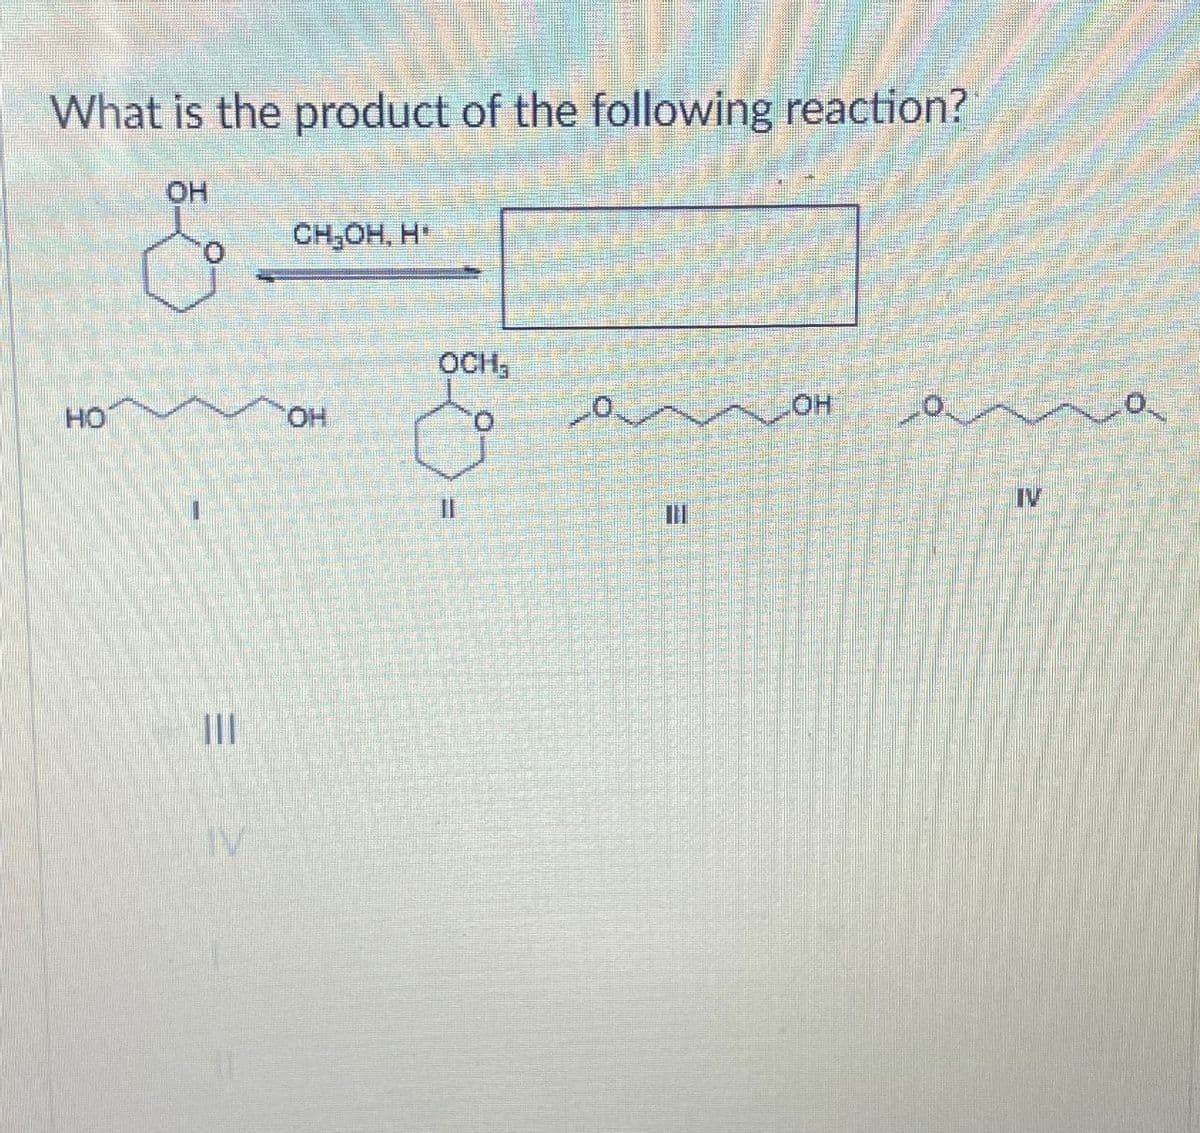 What is the product of the following reaction?
OH
CH₂OH, H
OCH
LOH
HO
OH
IV